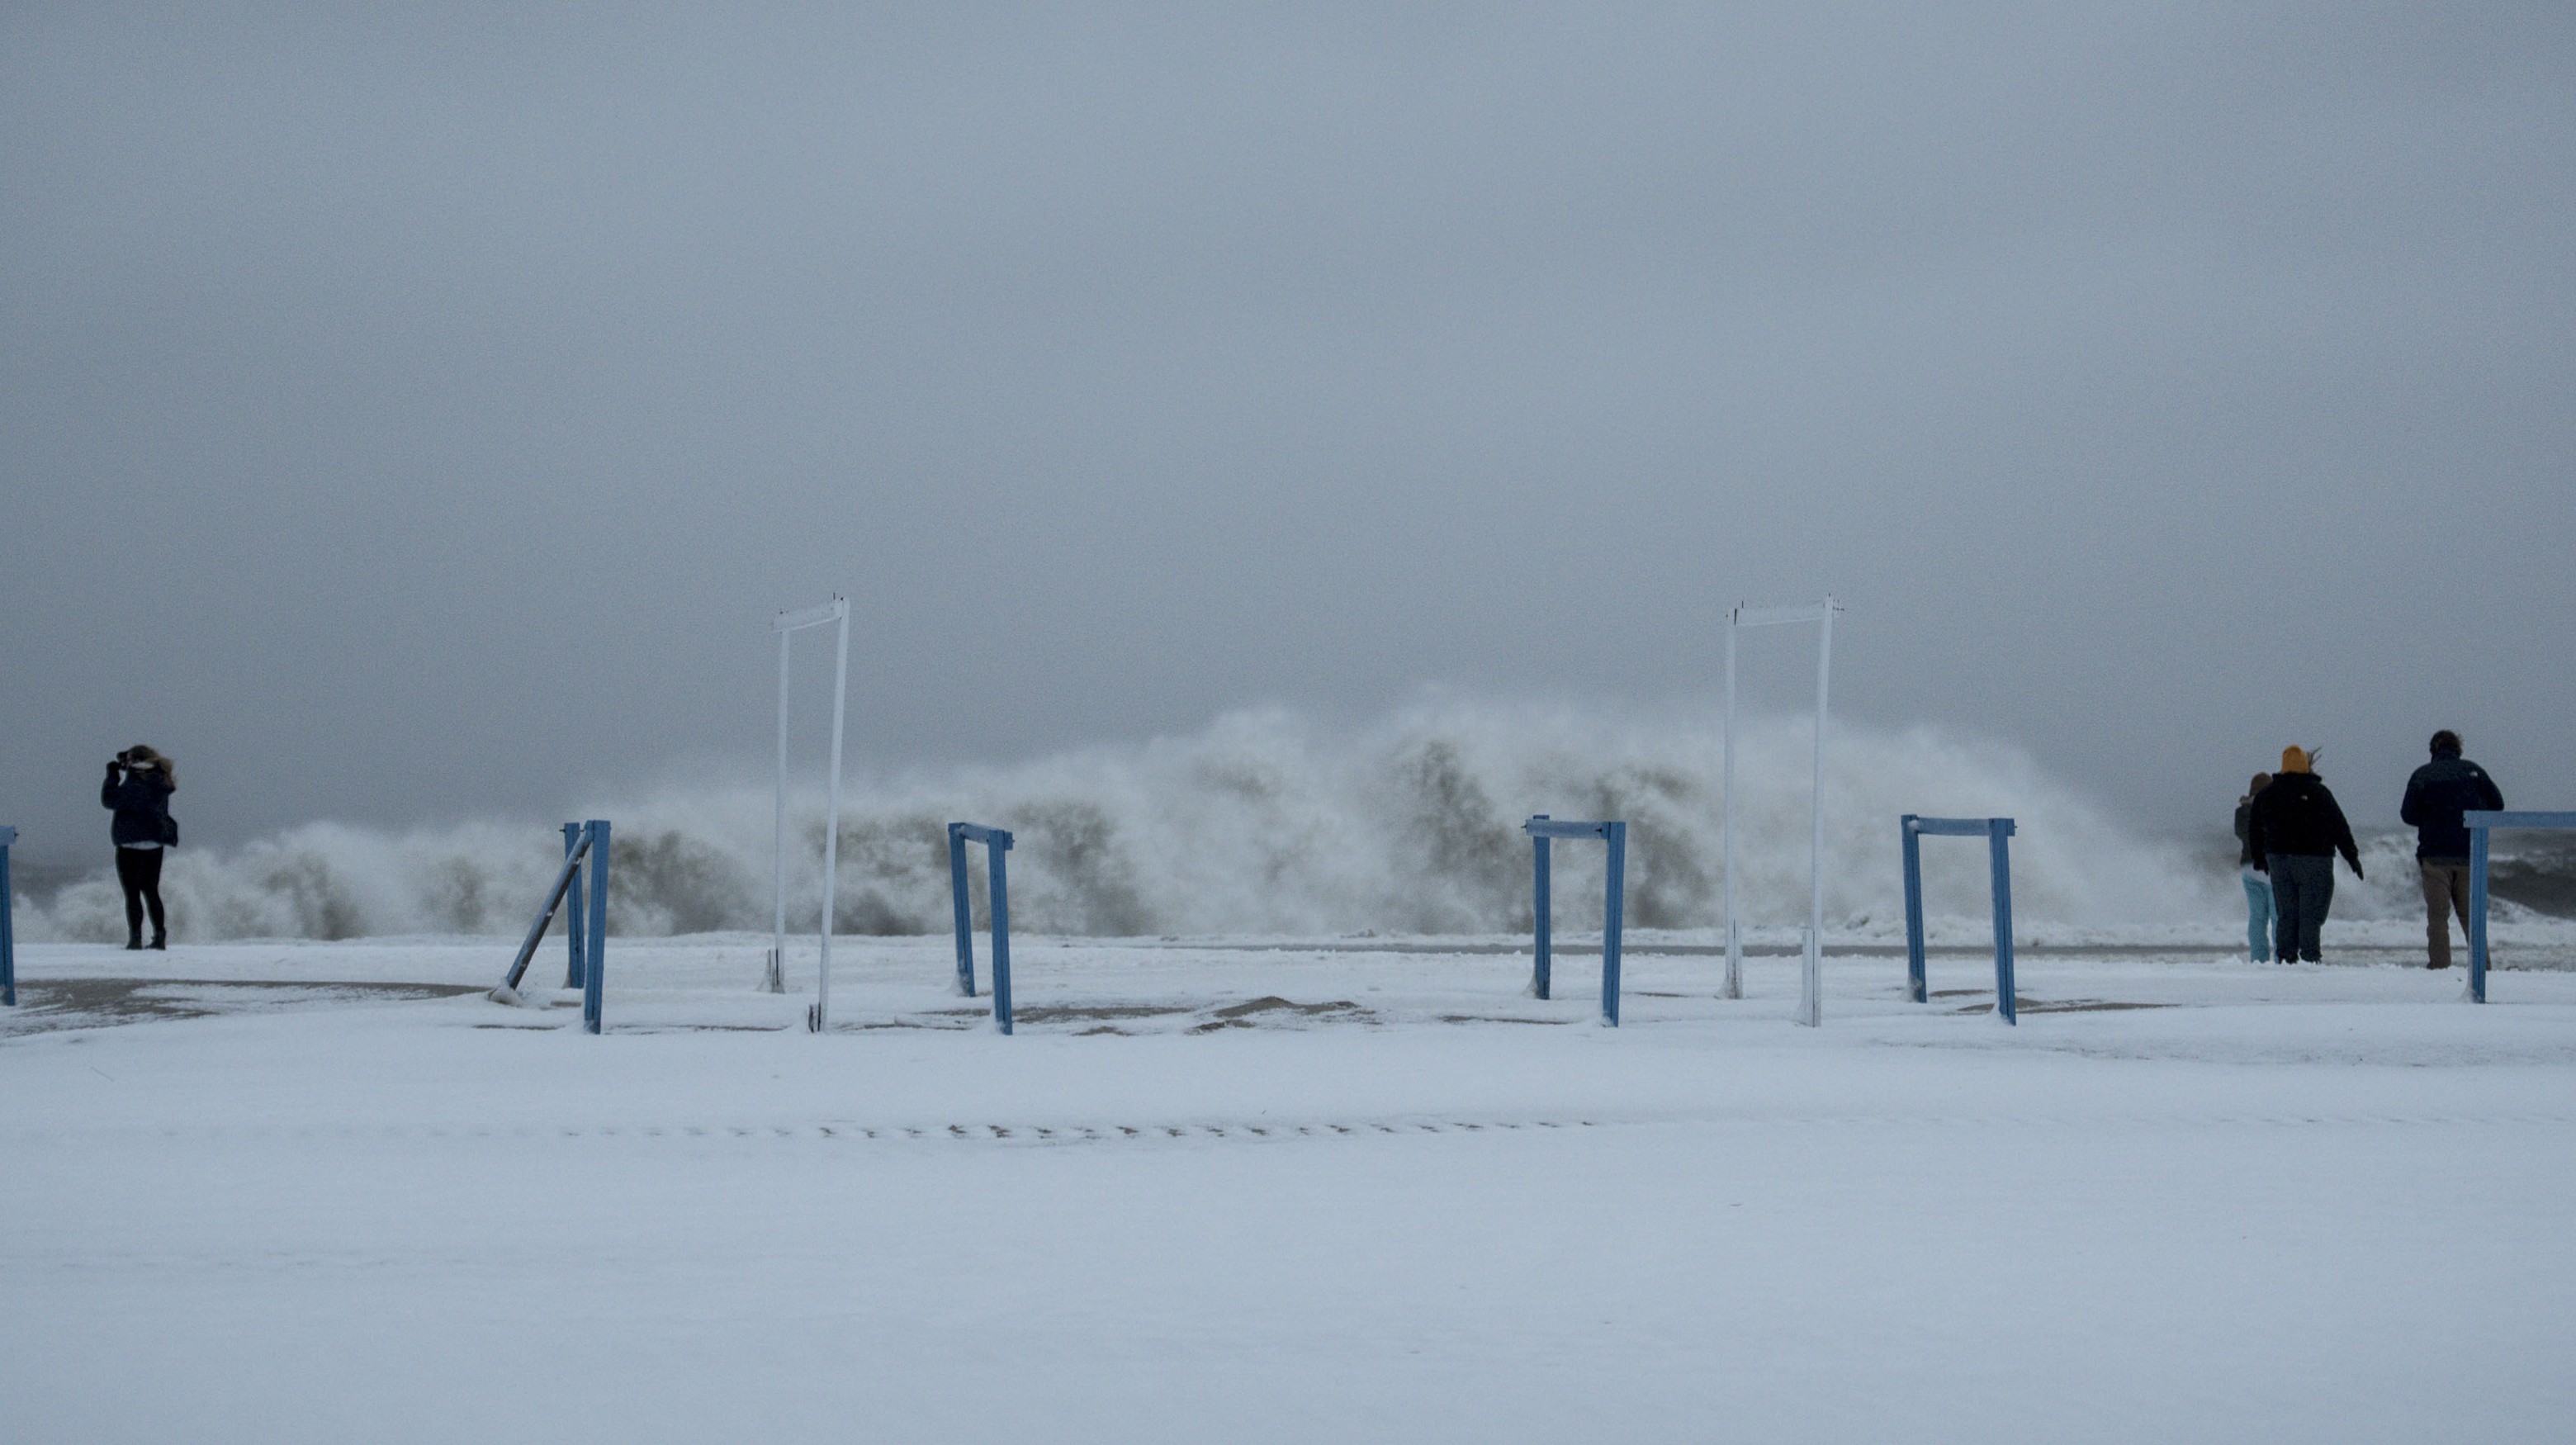 People take pictures on the beach as a storm hits the area on January 23, 2016 in Cape May, New Jersey. (Getty)